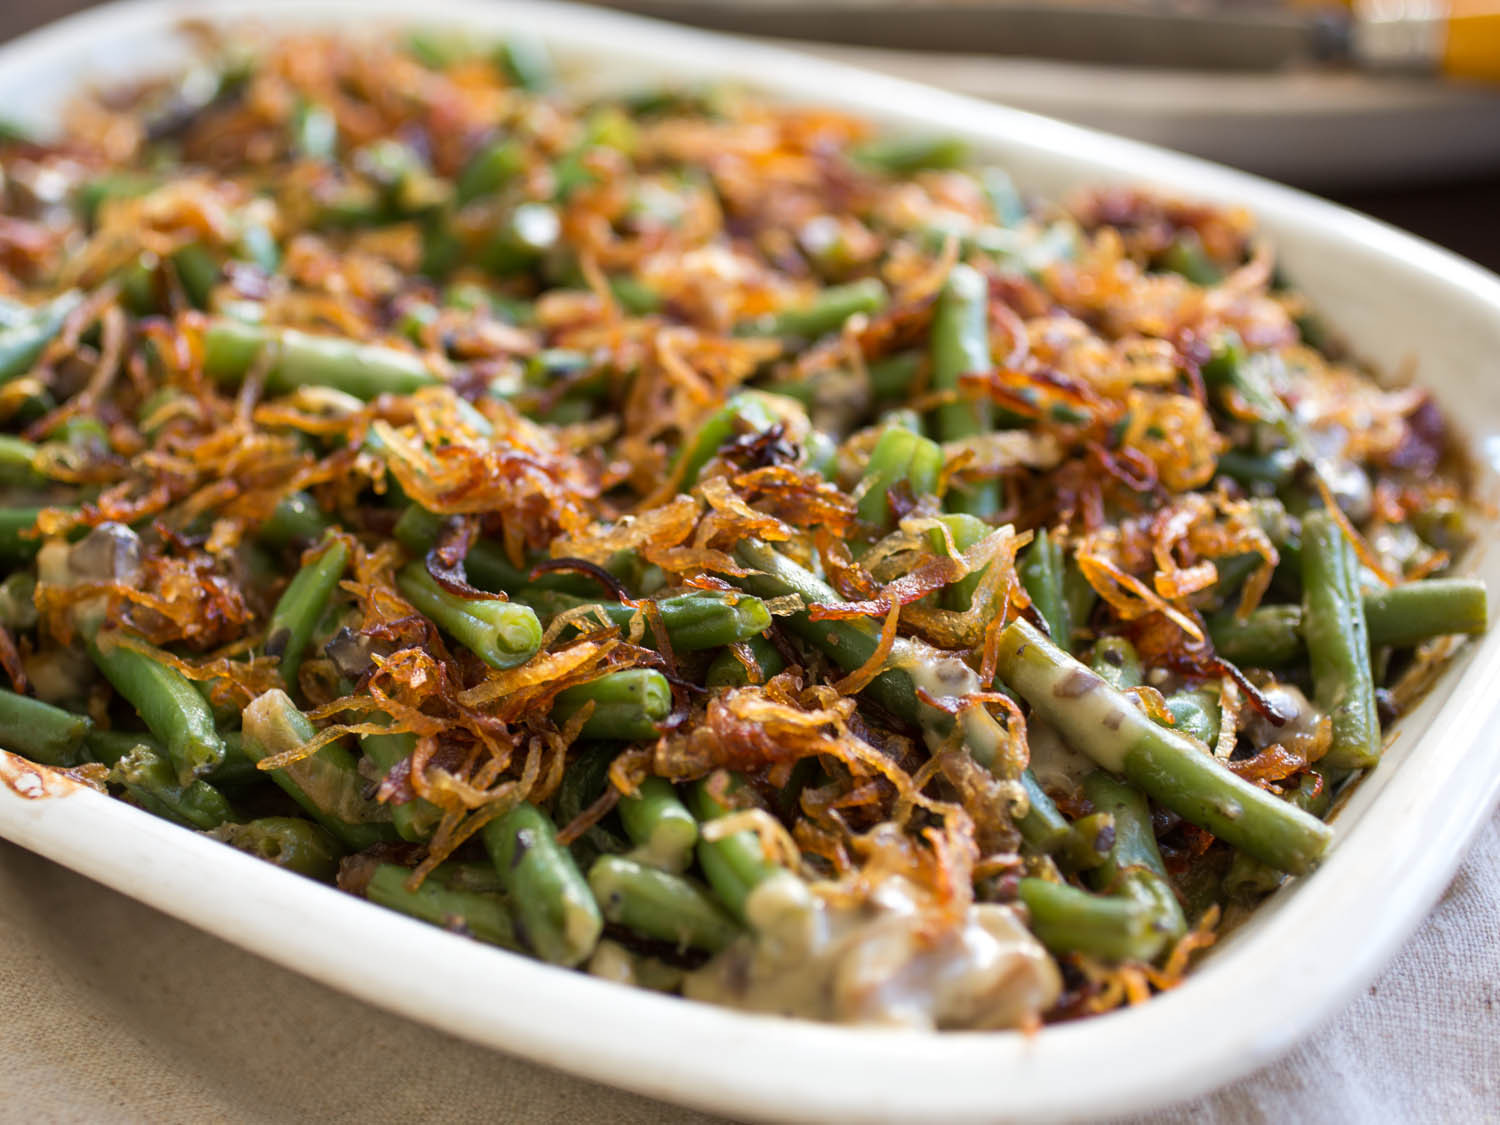 Green Bean Thanksgiving Side Dishes
 The Ultimate Homemade Green Bean Casserole Recipe